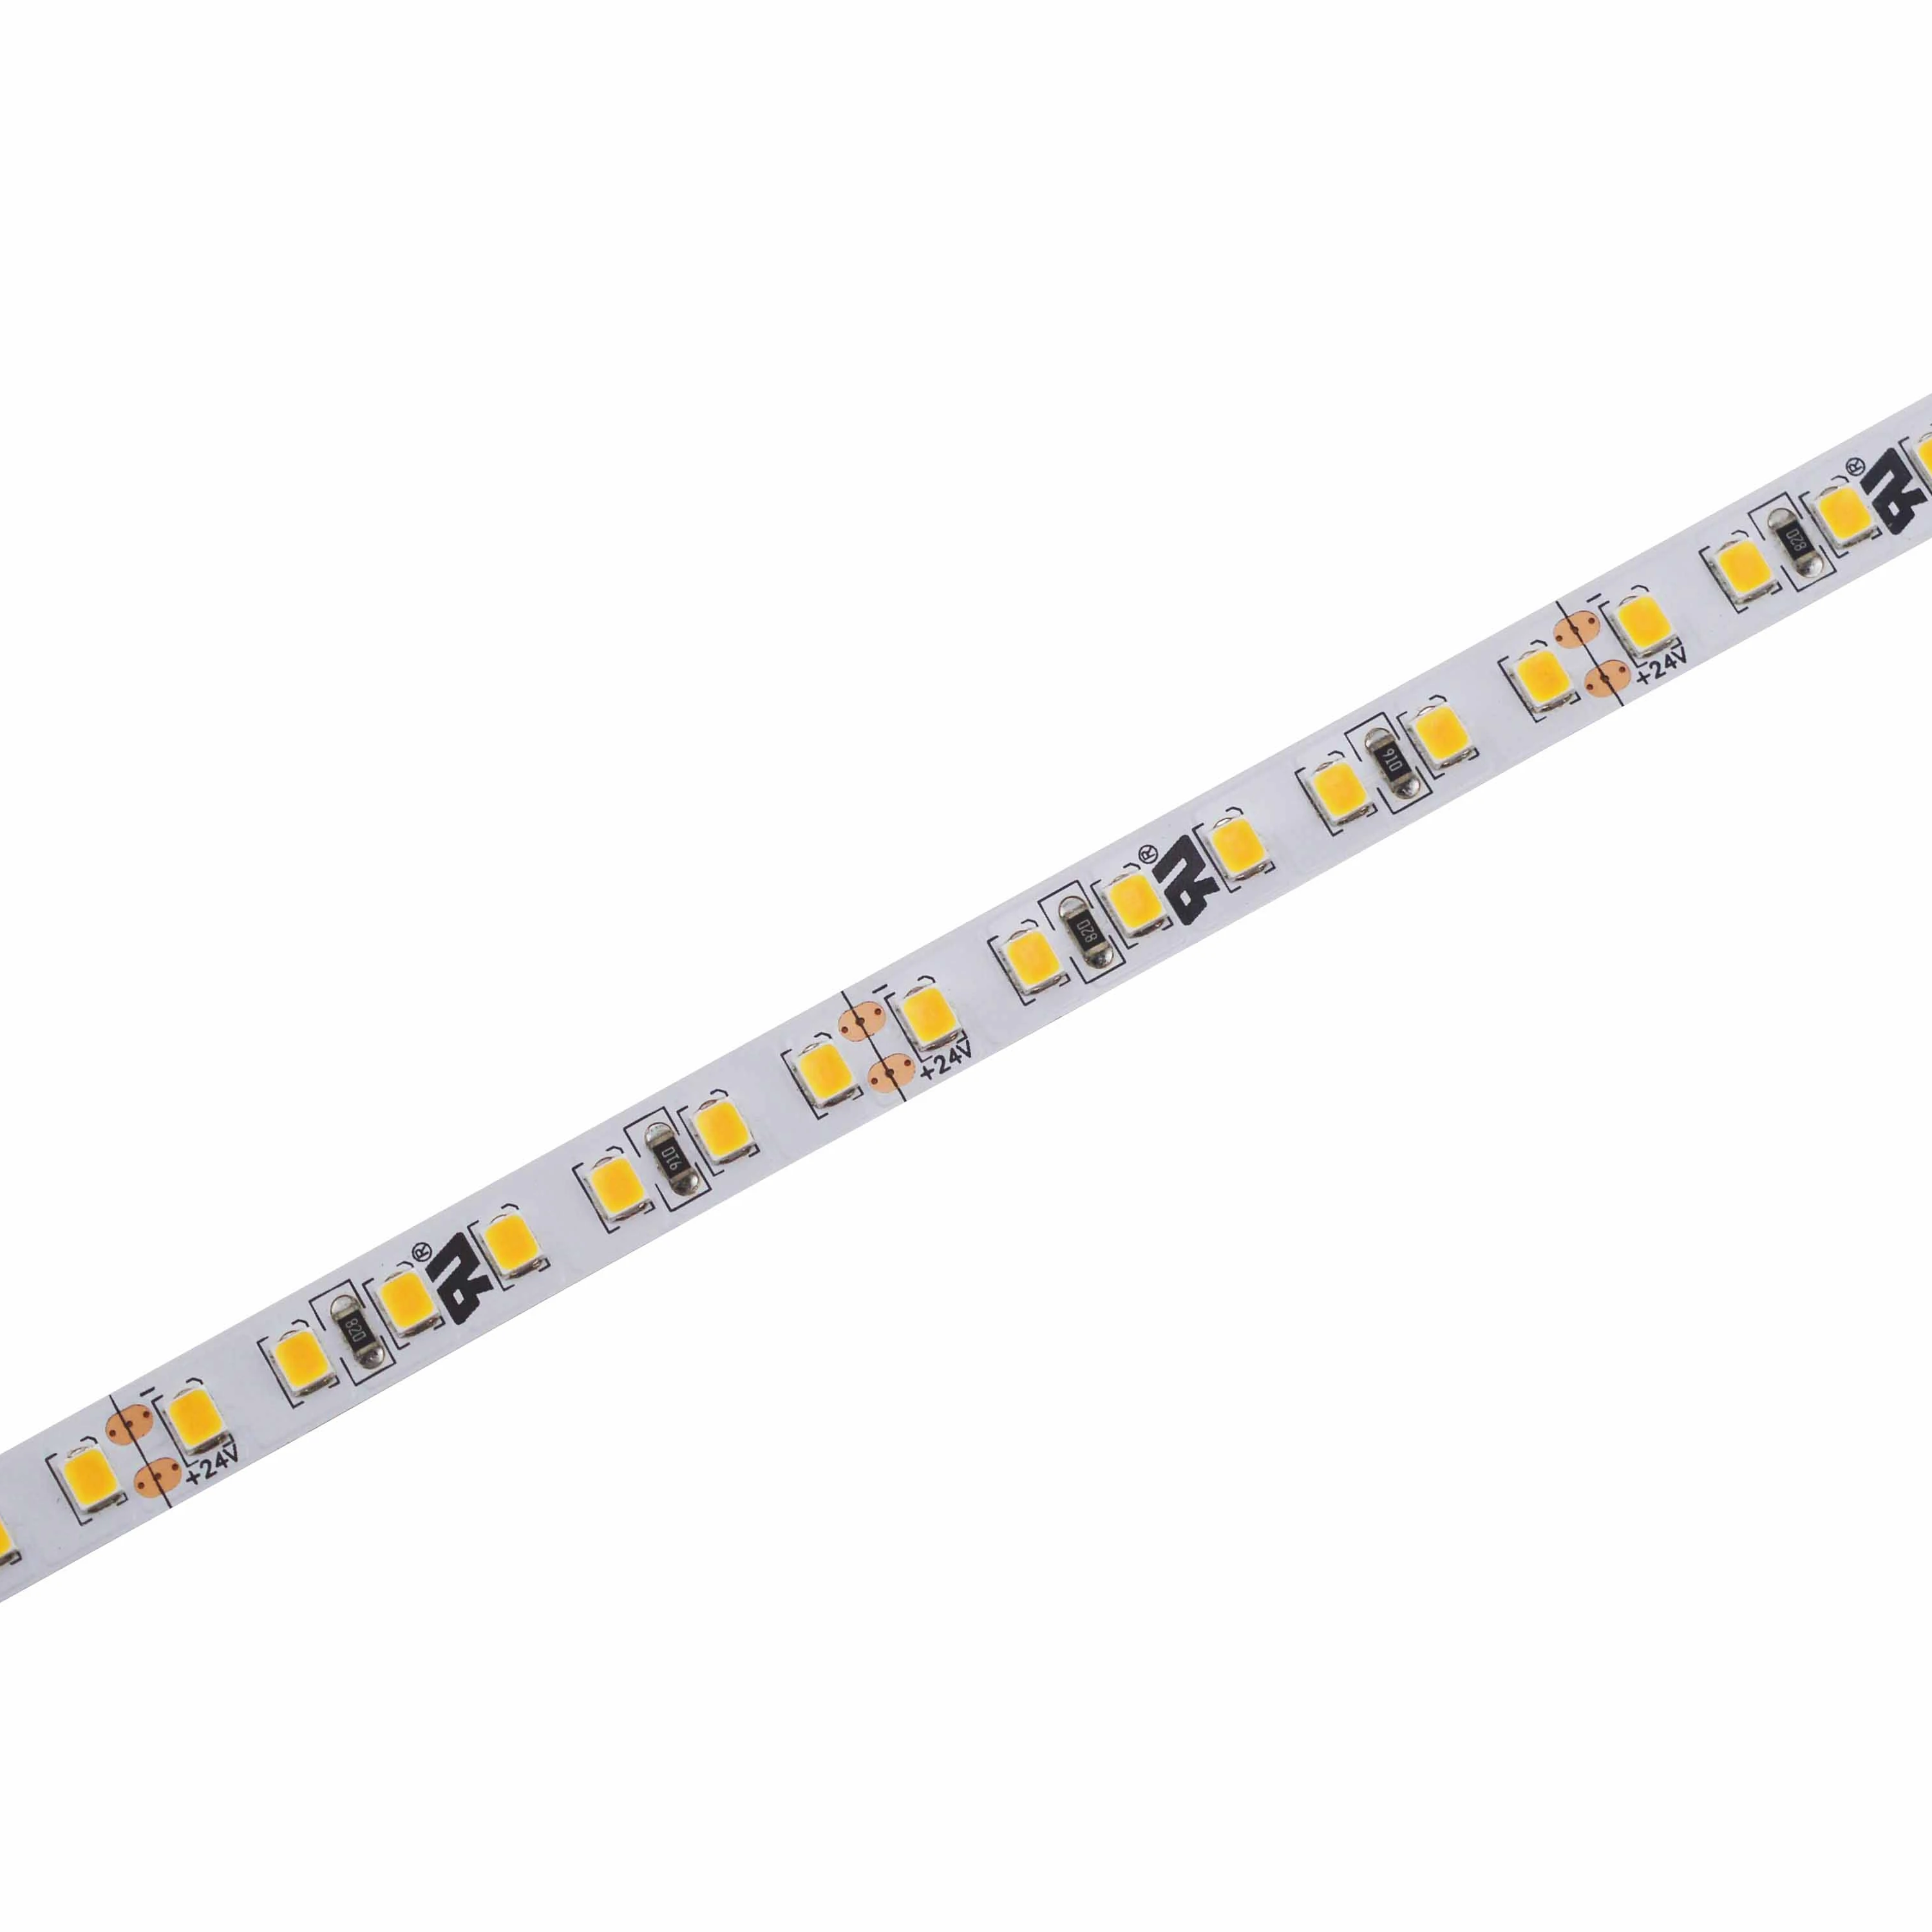 China-made cost-effective SMD2835 led strip for lighting your home